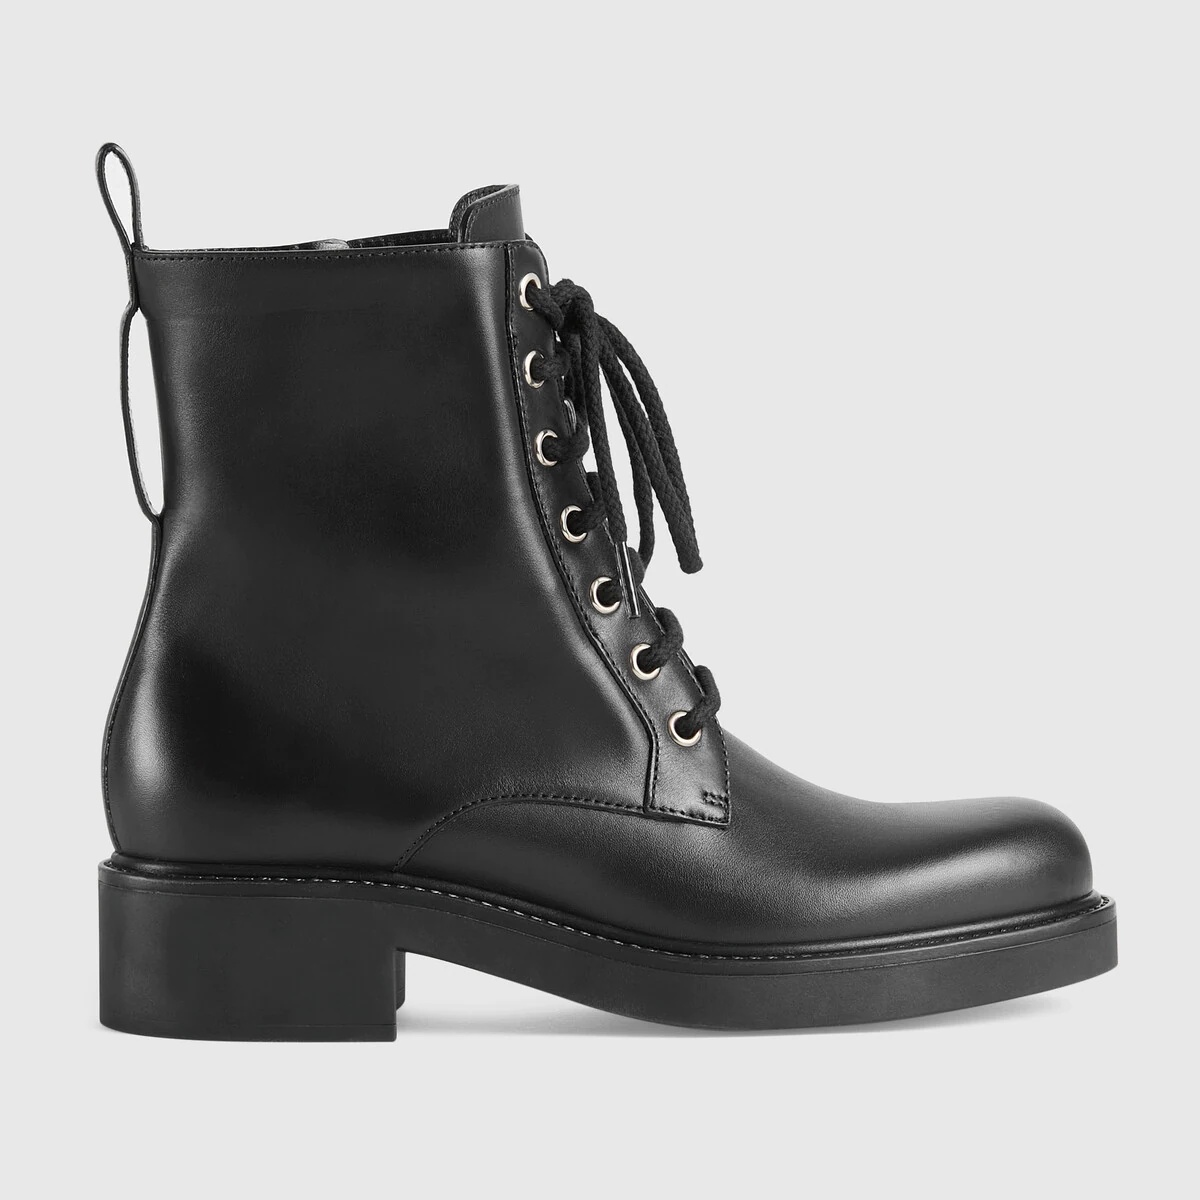 Women's ankle boot with Double G - 6